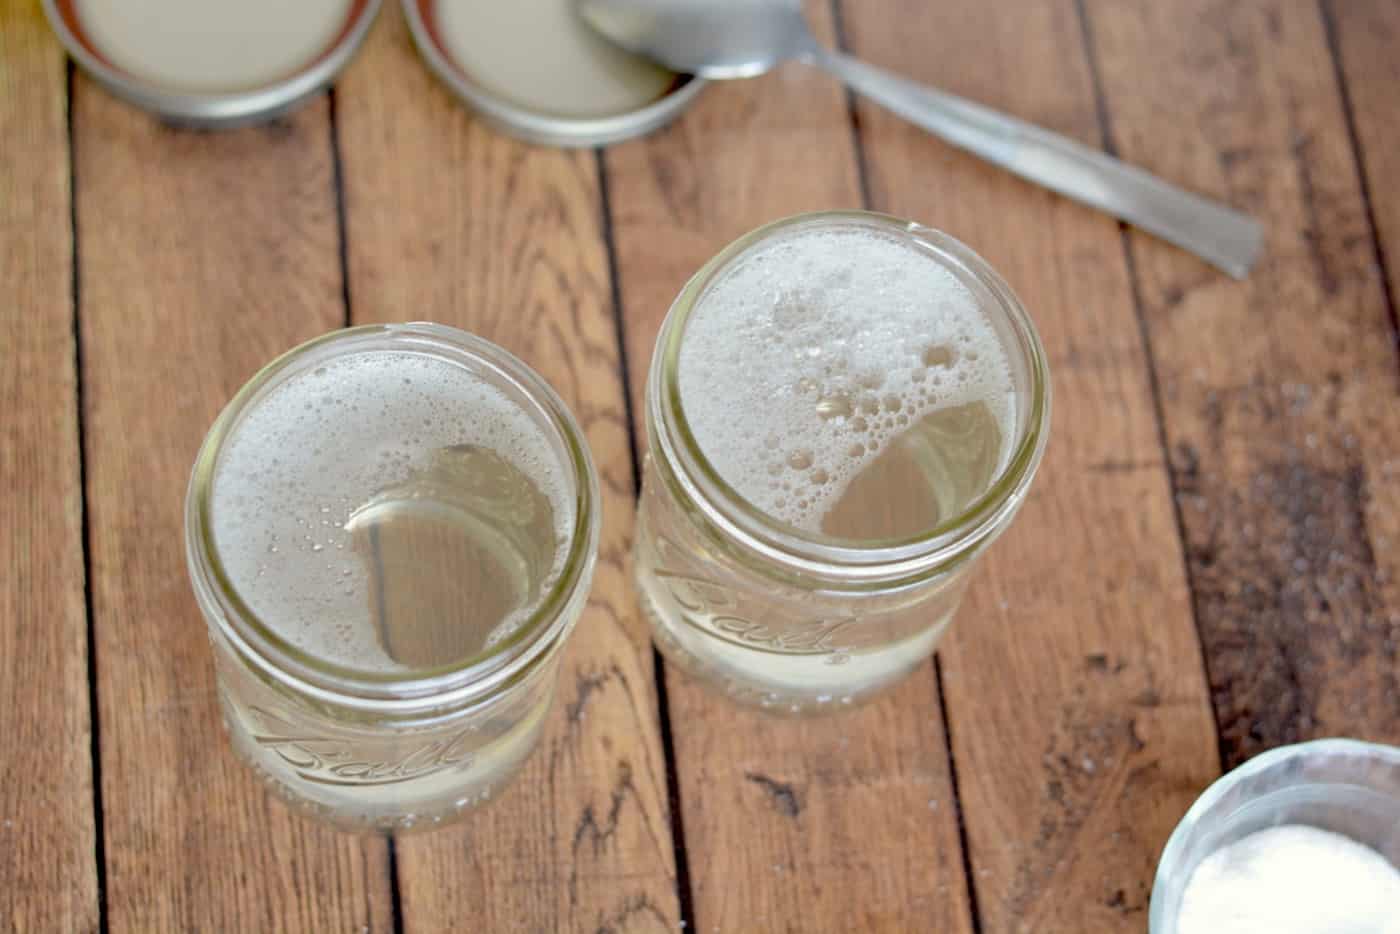 Two mason jars with liquid laundry detergent in them with the lids off on a wood background